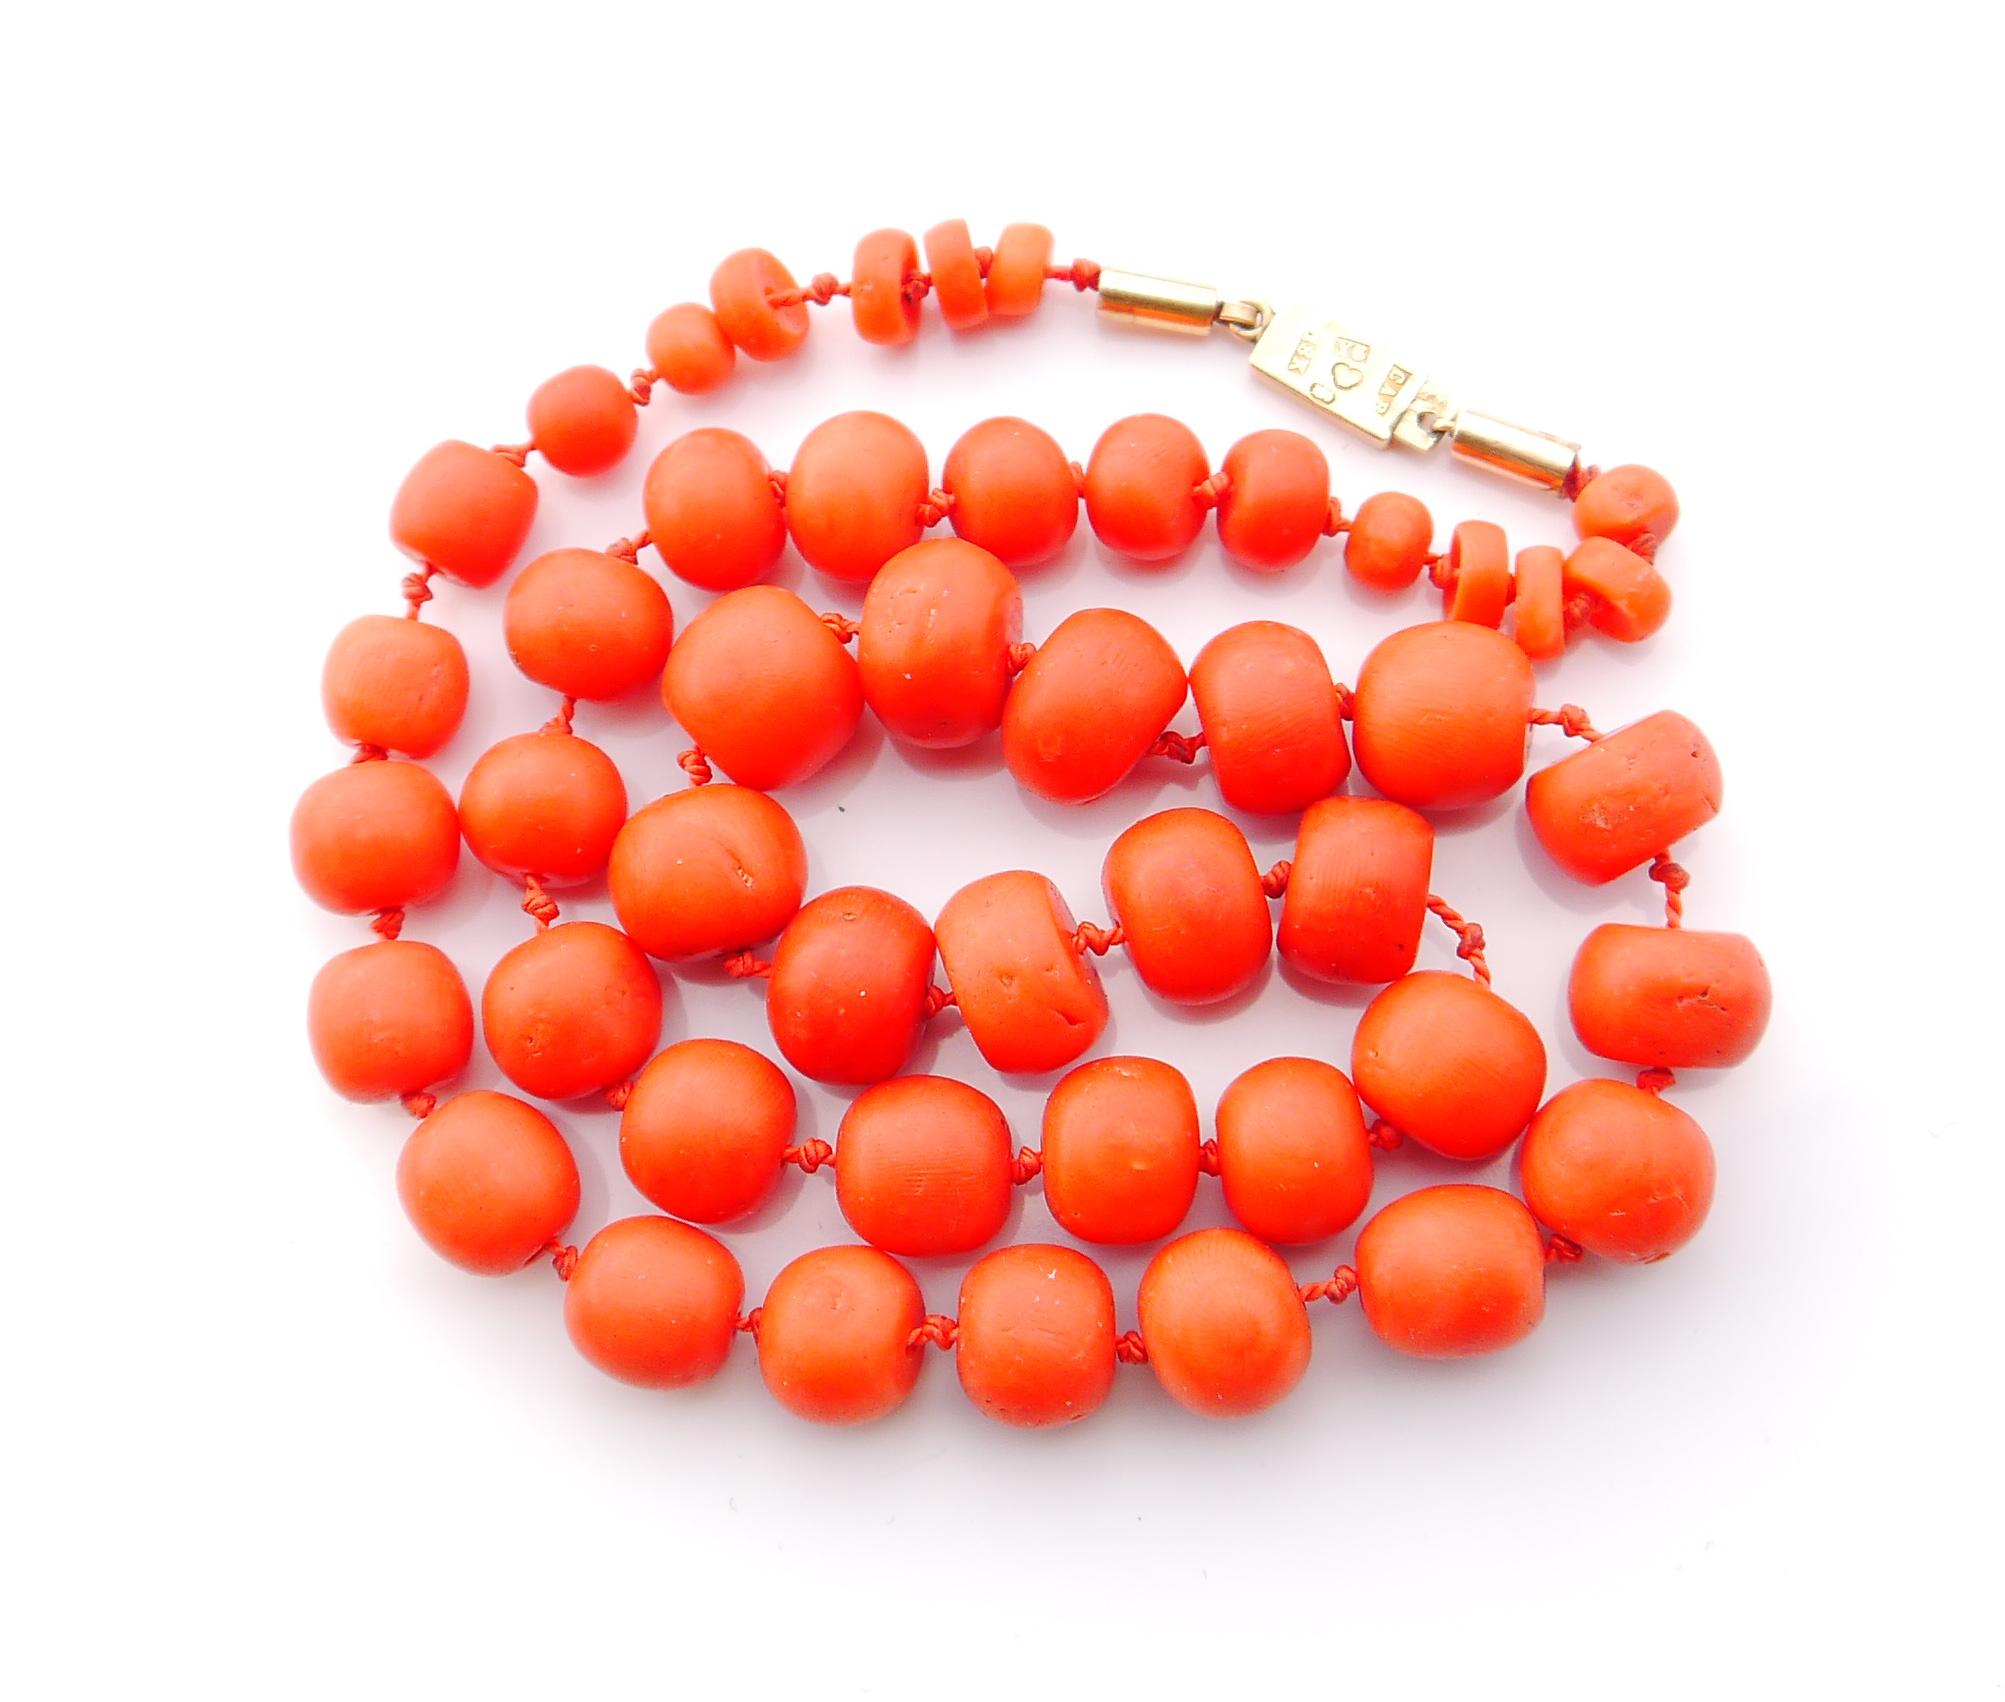 Old Necklace with a set of 47 hand-cut and polished gradually sized beads of natural untreated Precious Coral. Silken thread. Diameters of beads range from Ø 12 mm x 8 mm to Ø 5 x 3 mm. Total weight of Coral - ca. 200 ct.

All beads of even medium